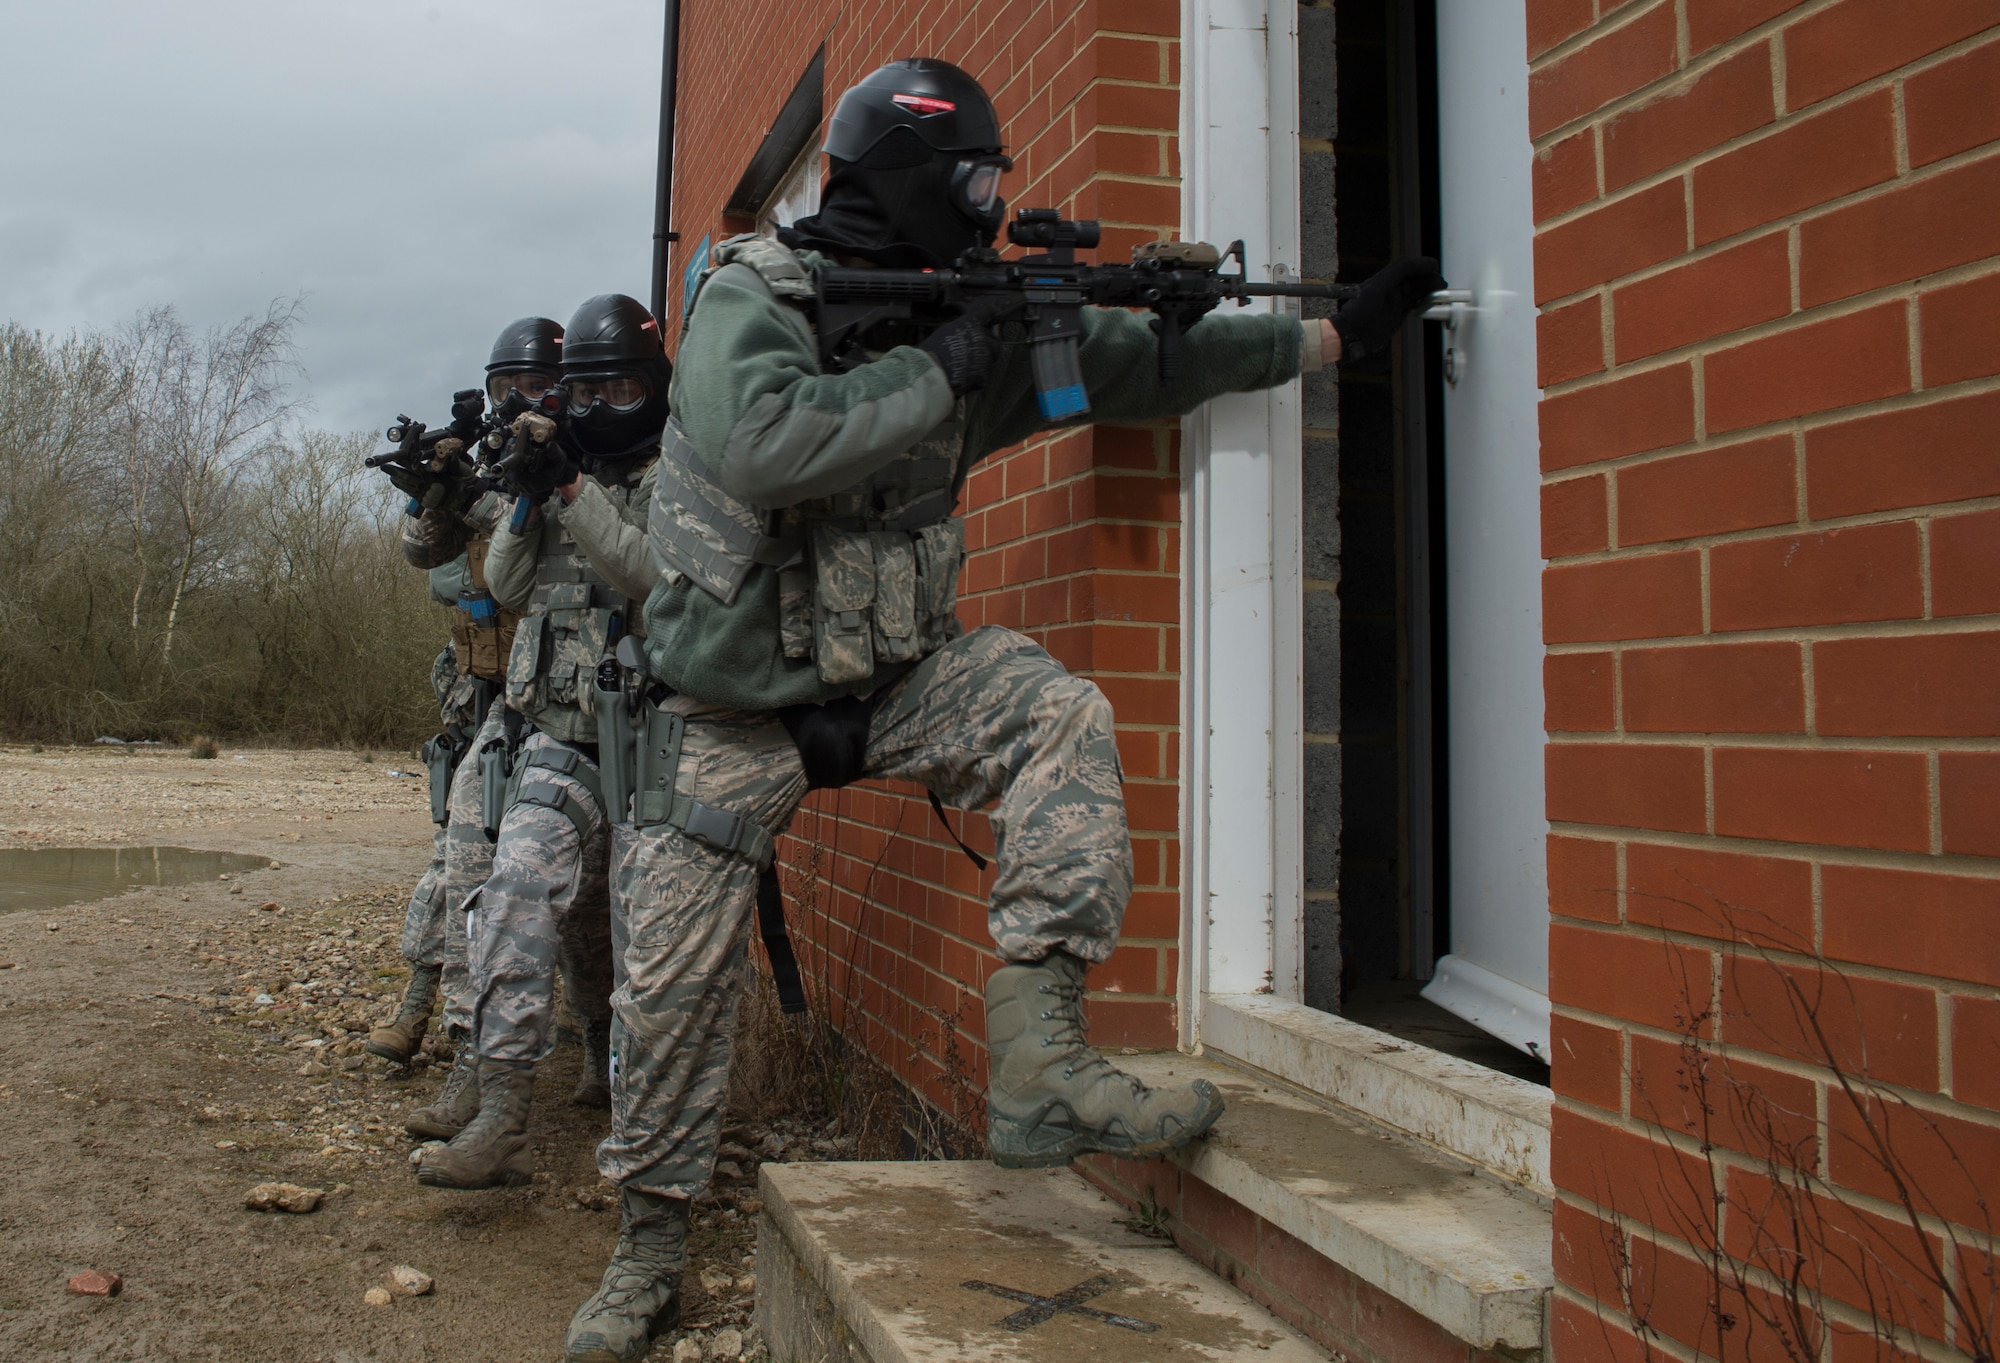 Airmen with the 422nd Security Forces Squadron participate in a force on force exercise at Bicester Garrison, United Kingdom, March 29, 2018. The urban warfare exercise was designed to enhance and sharpen Airmen’s house clearing techniques. (U.S. Air Force photo by Senior Airman Chase Sousa/Released)